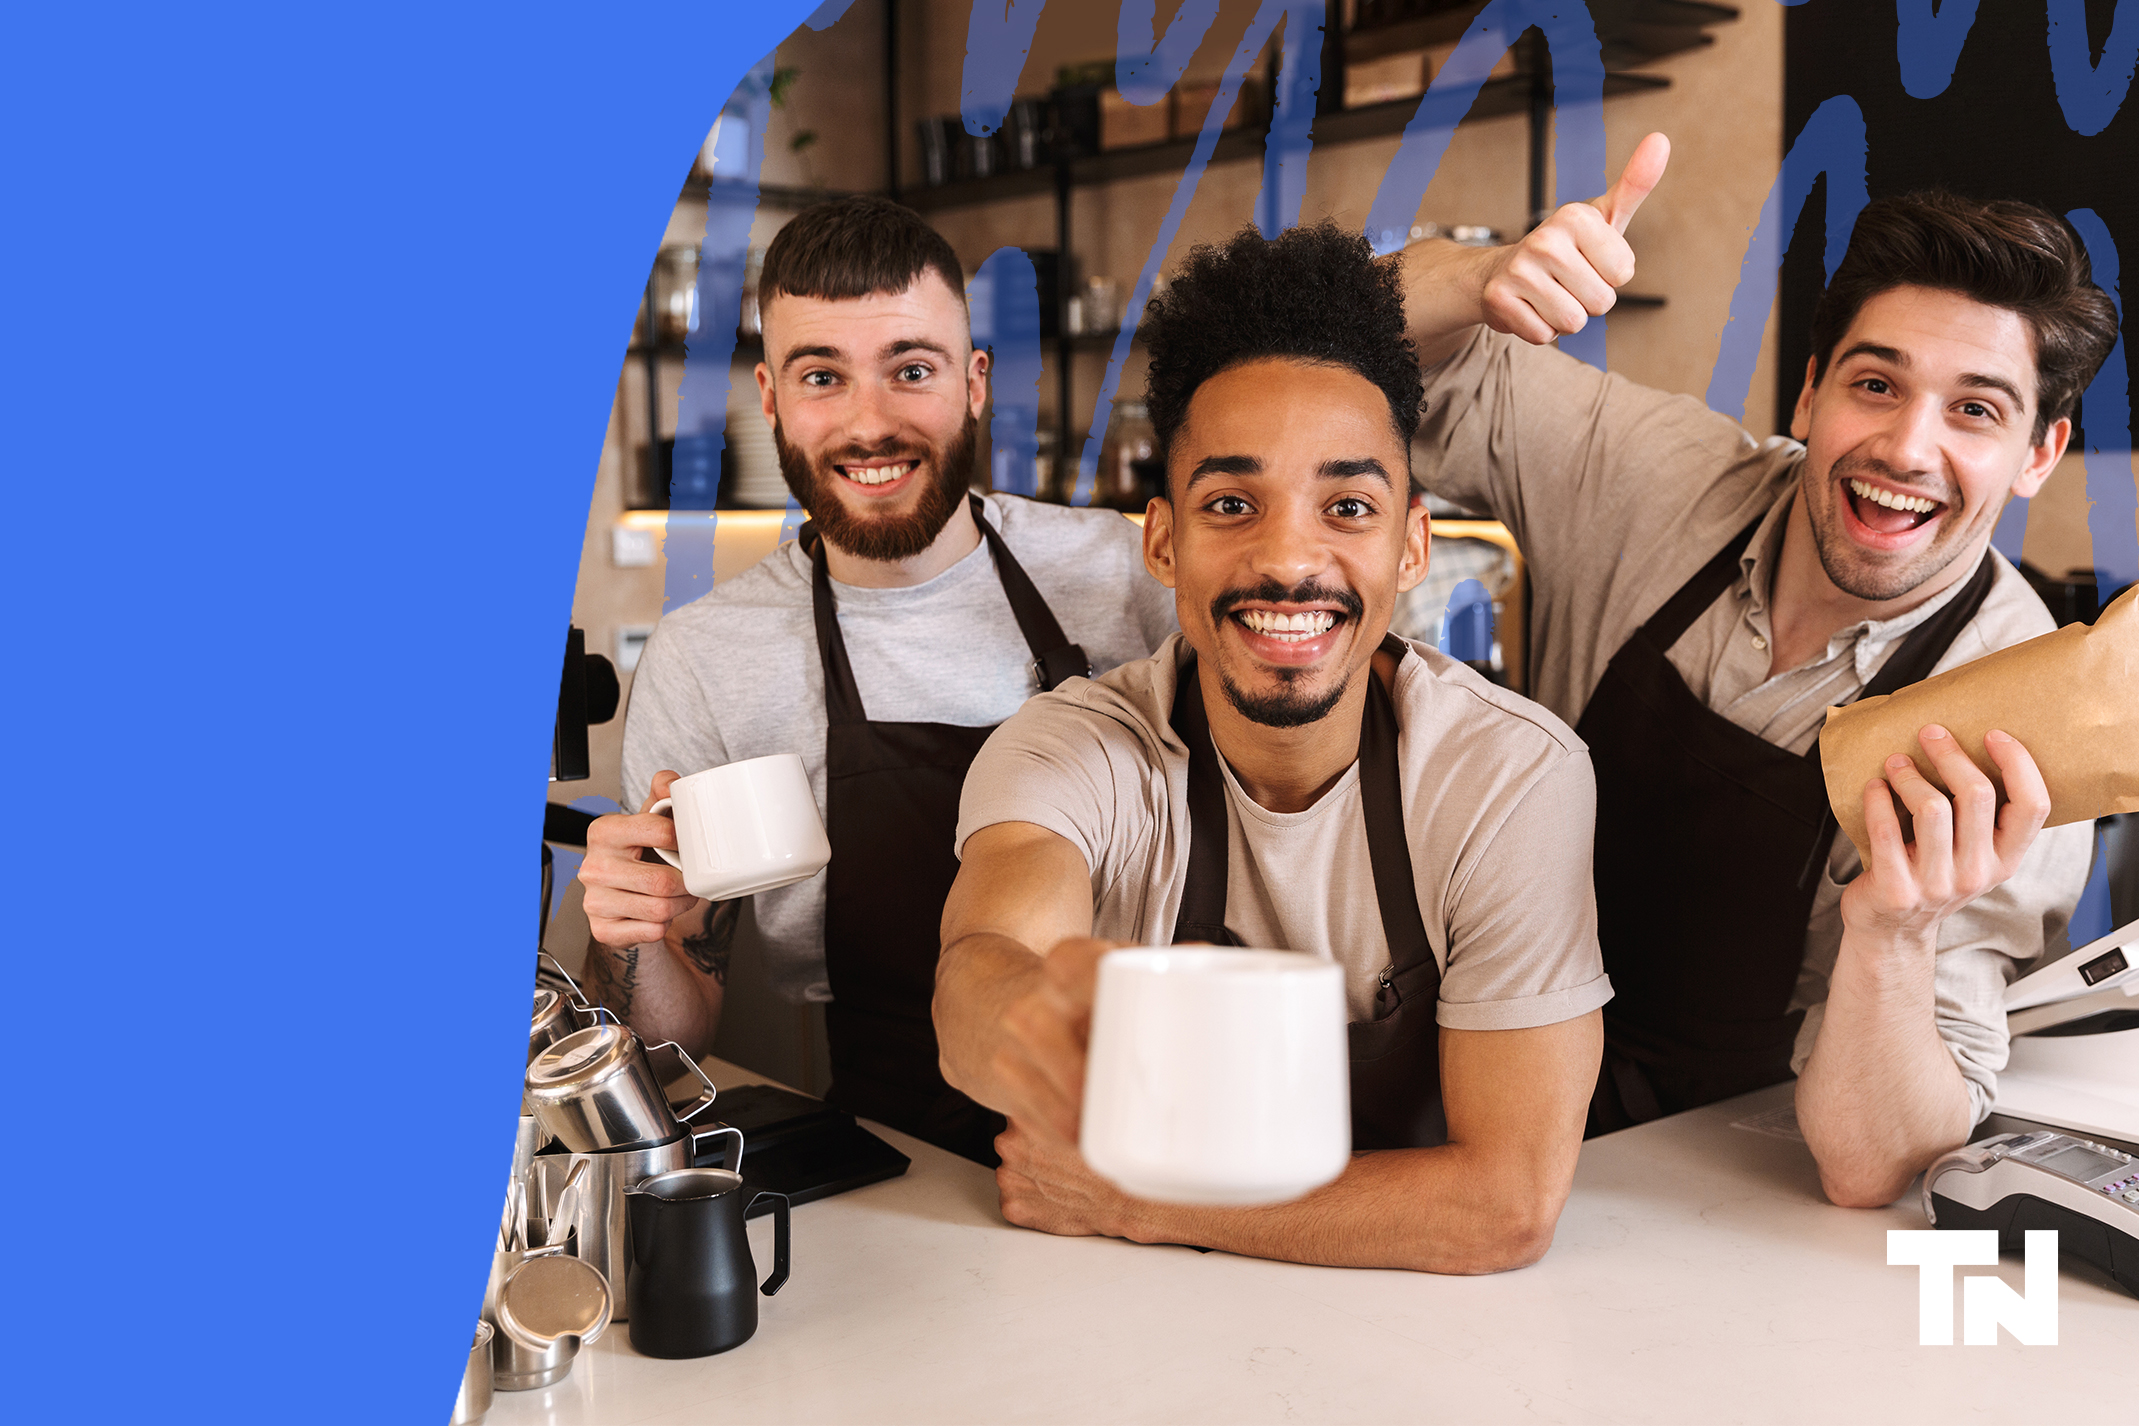 Three young men are happy to be working in a positive experience working in their coffee shop. Their manager has establish a sense of community.